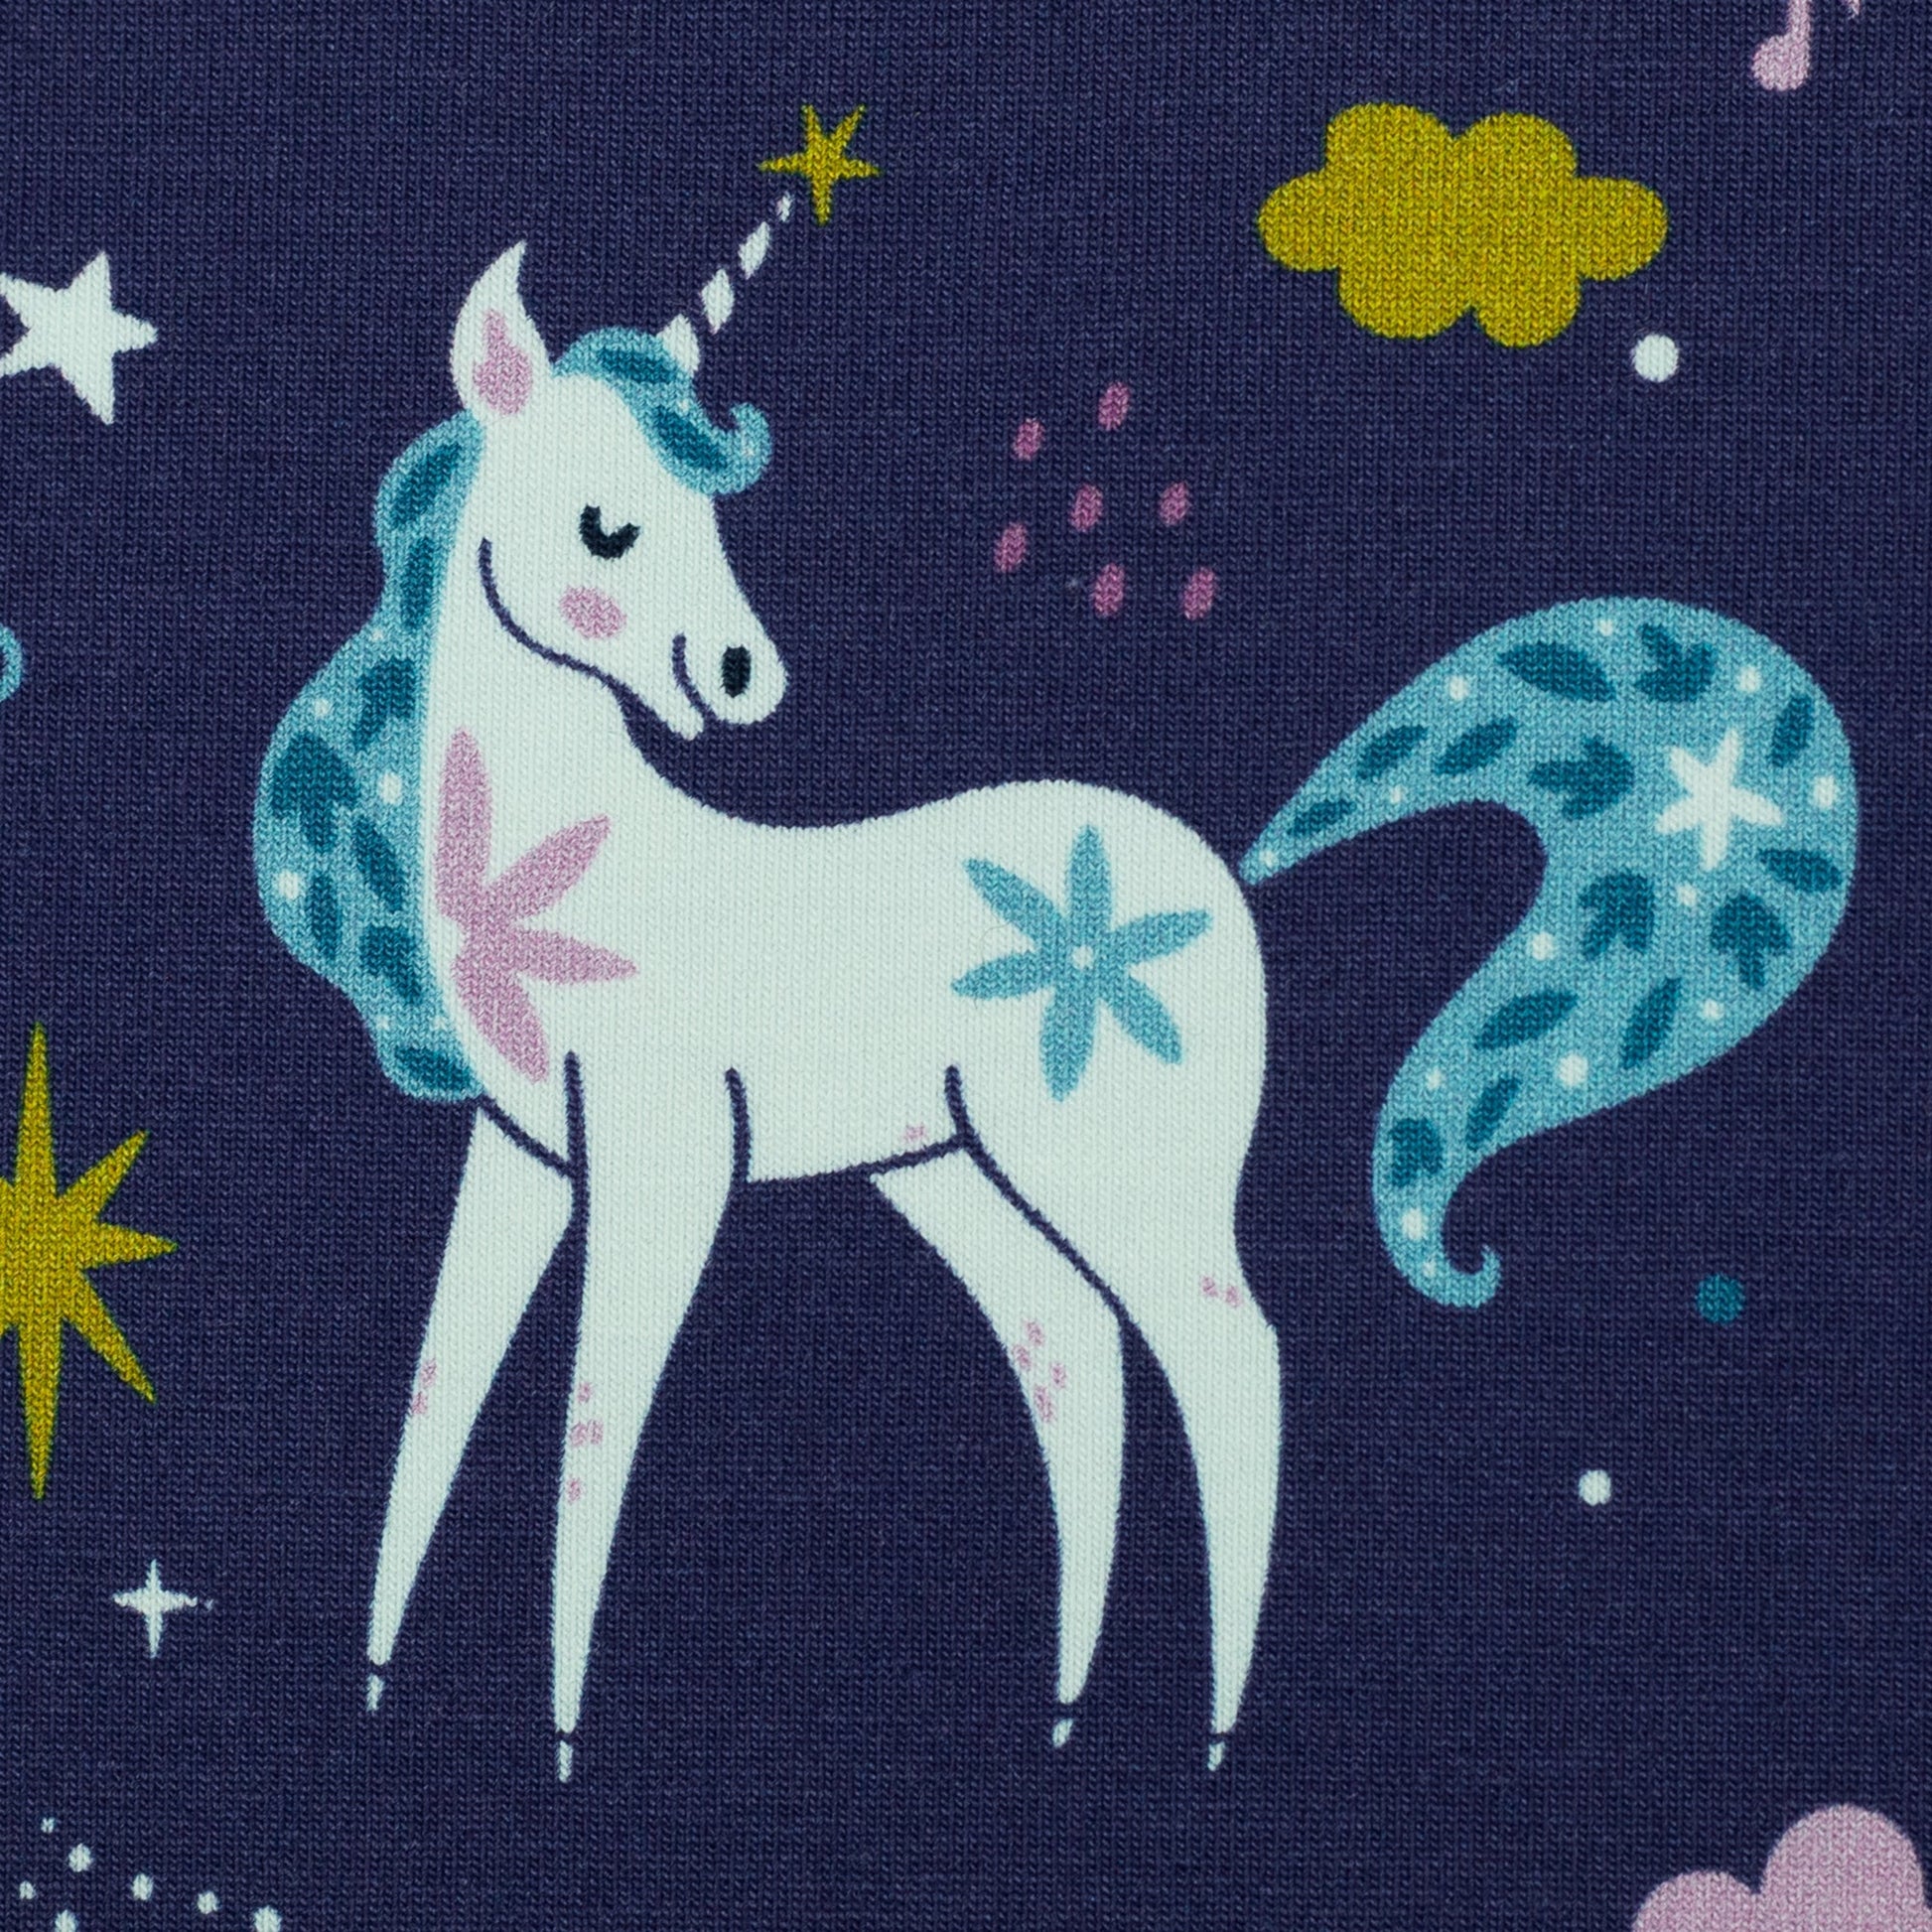 Coming Soon - Swafing Prints - Unicorns on Dark Blue - 220 gsm Jersey - Expected to Stock Week of April 28th - Little Rhody Sewing Co.